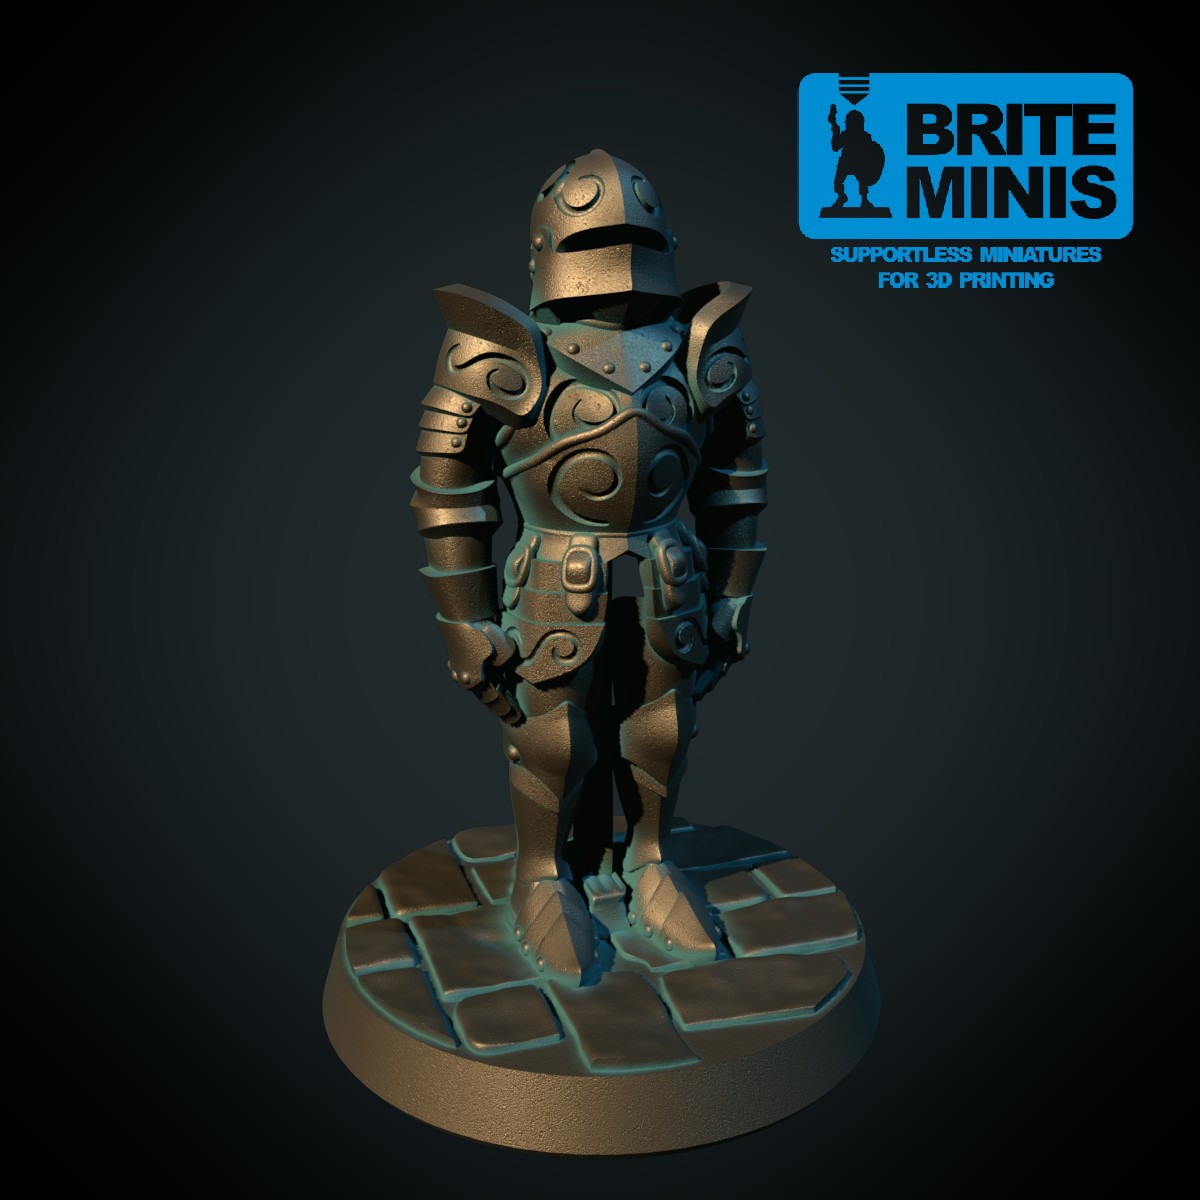 Suit of armor 28mm (supportless, FDM-friendly)